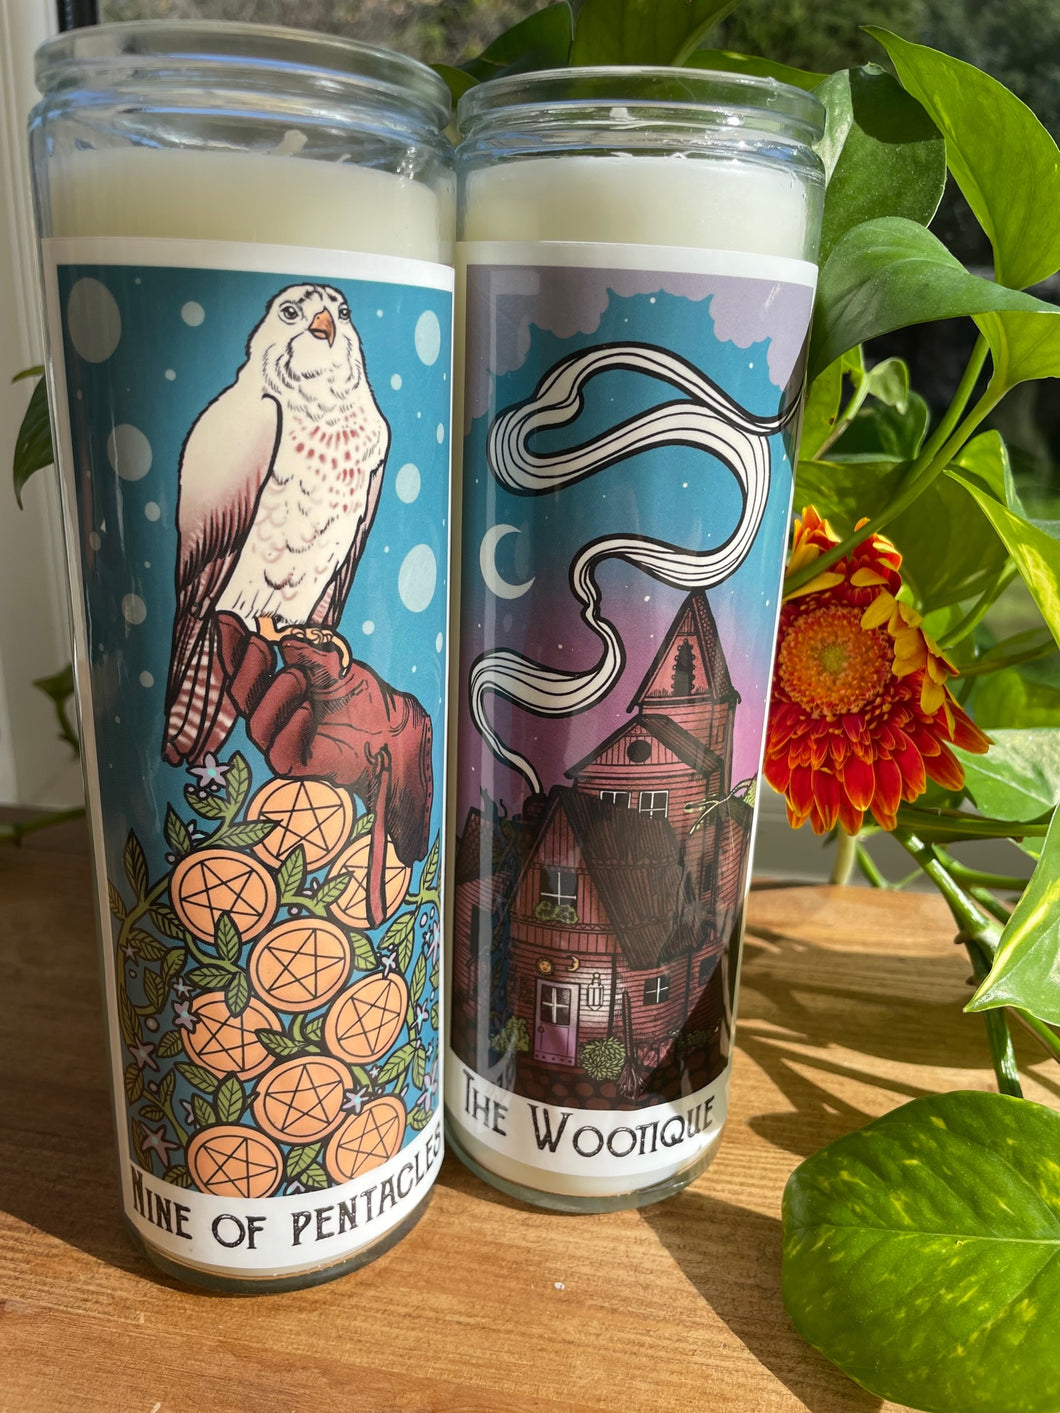 The Wootique Altar Candles